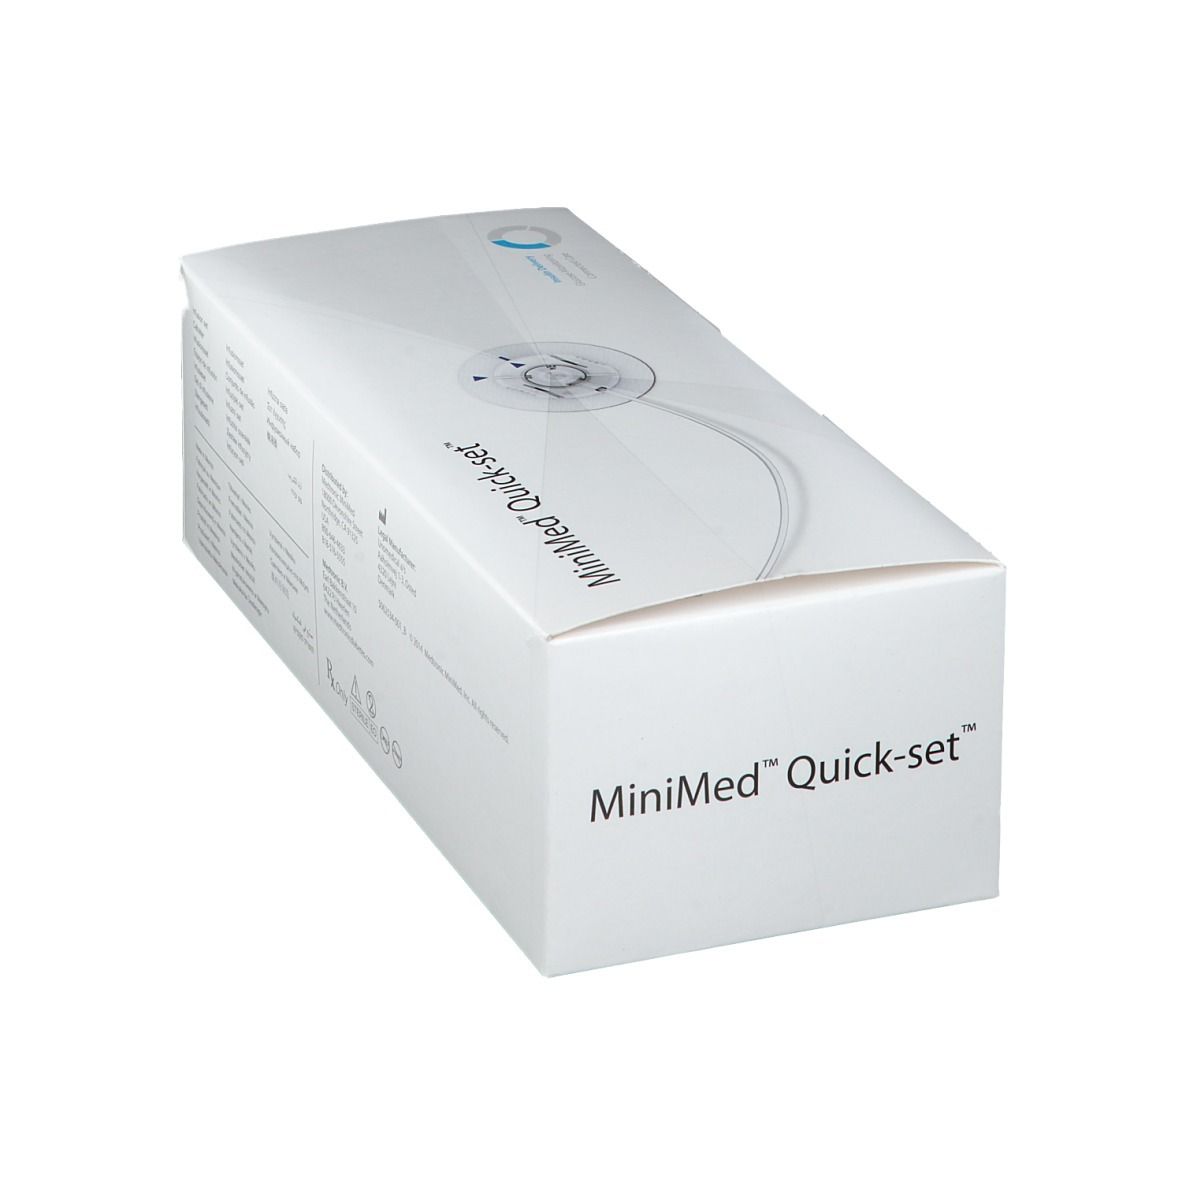 MiniMed Quick-set® Infusionsset 6 mm Kanüle / 60 cm Schlauch